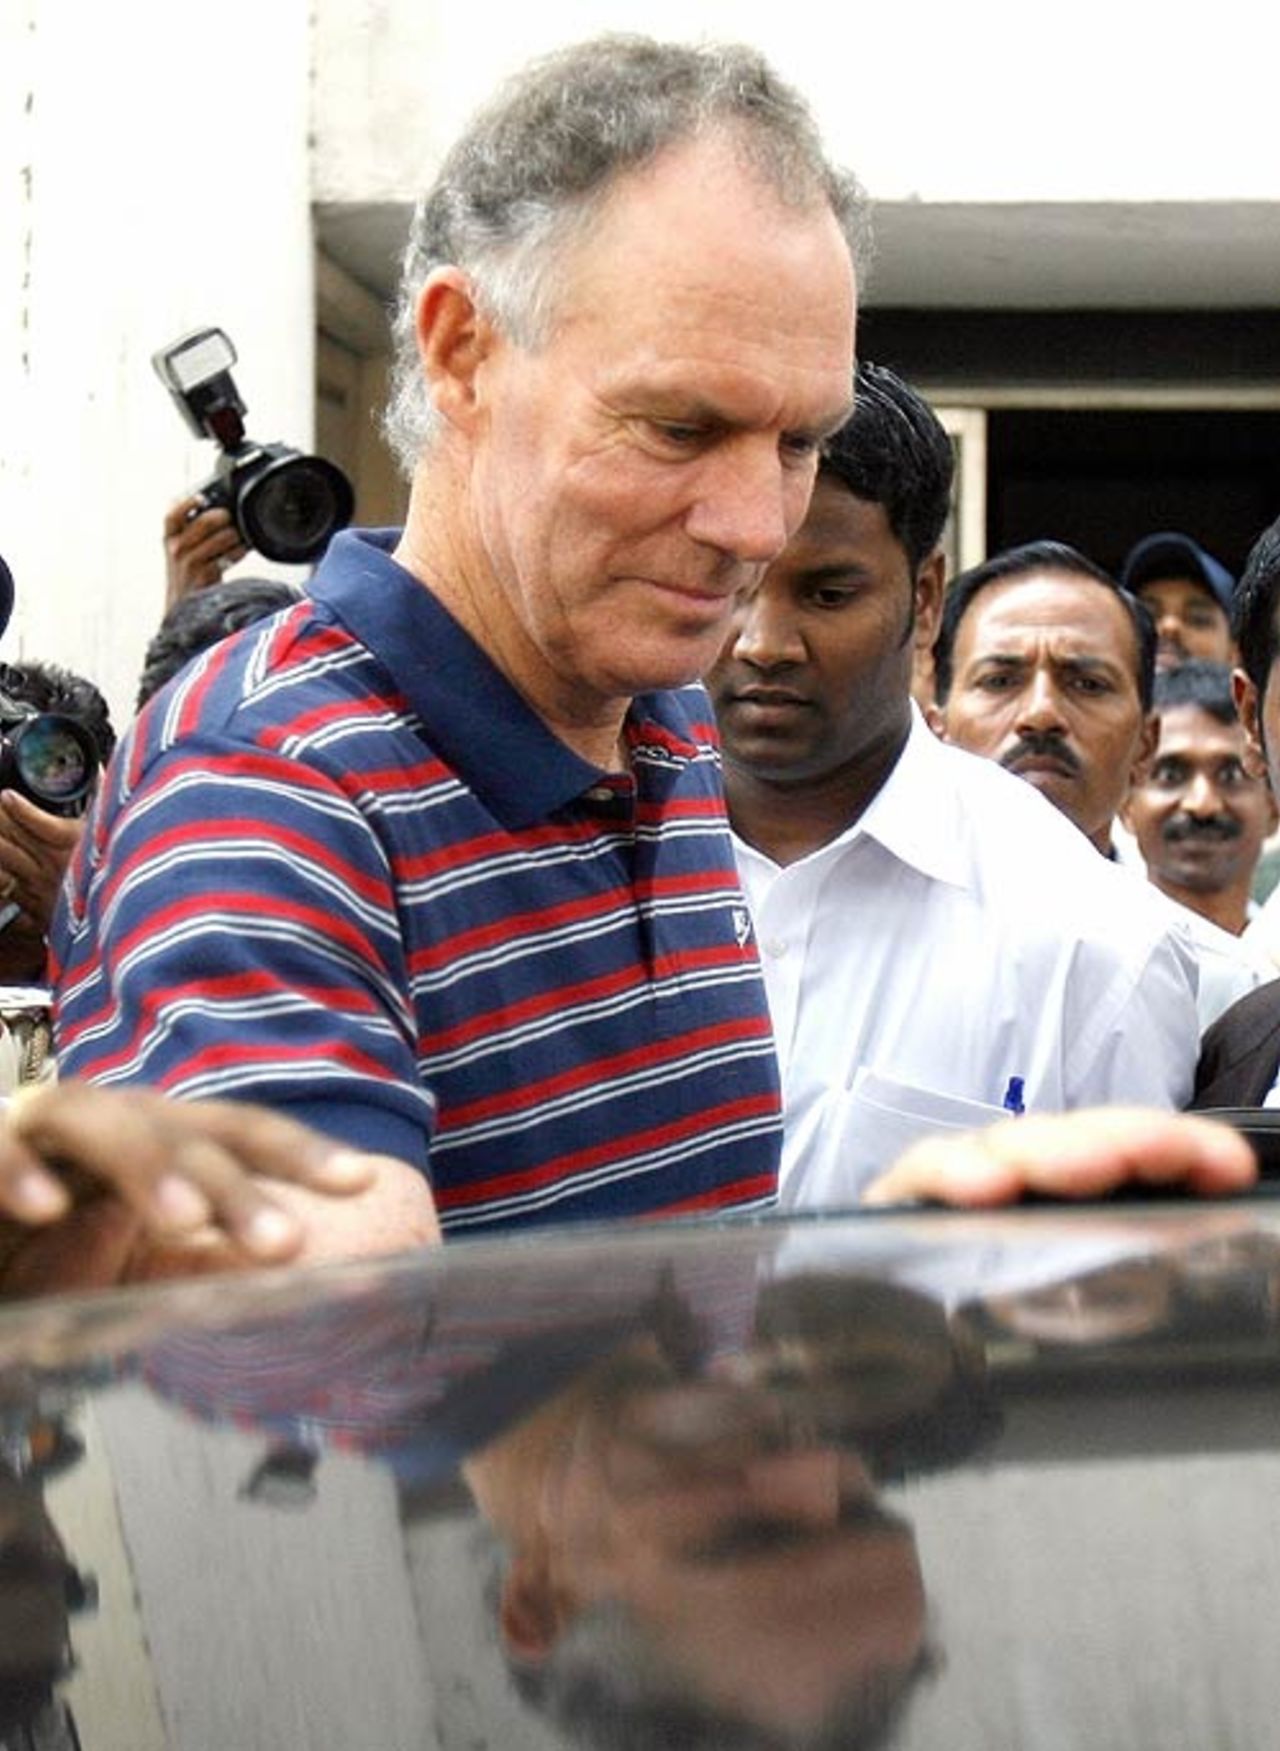 Greg Chappell leaves the hospital after a medical check-up, Mumbai, April 7, 2007